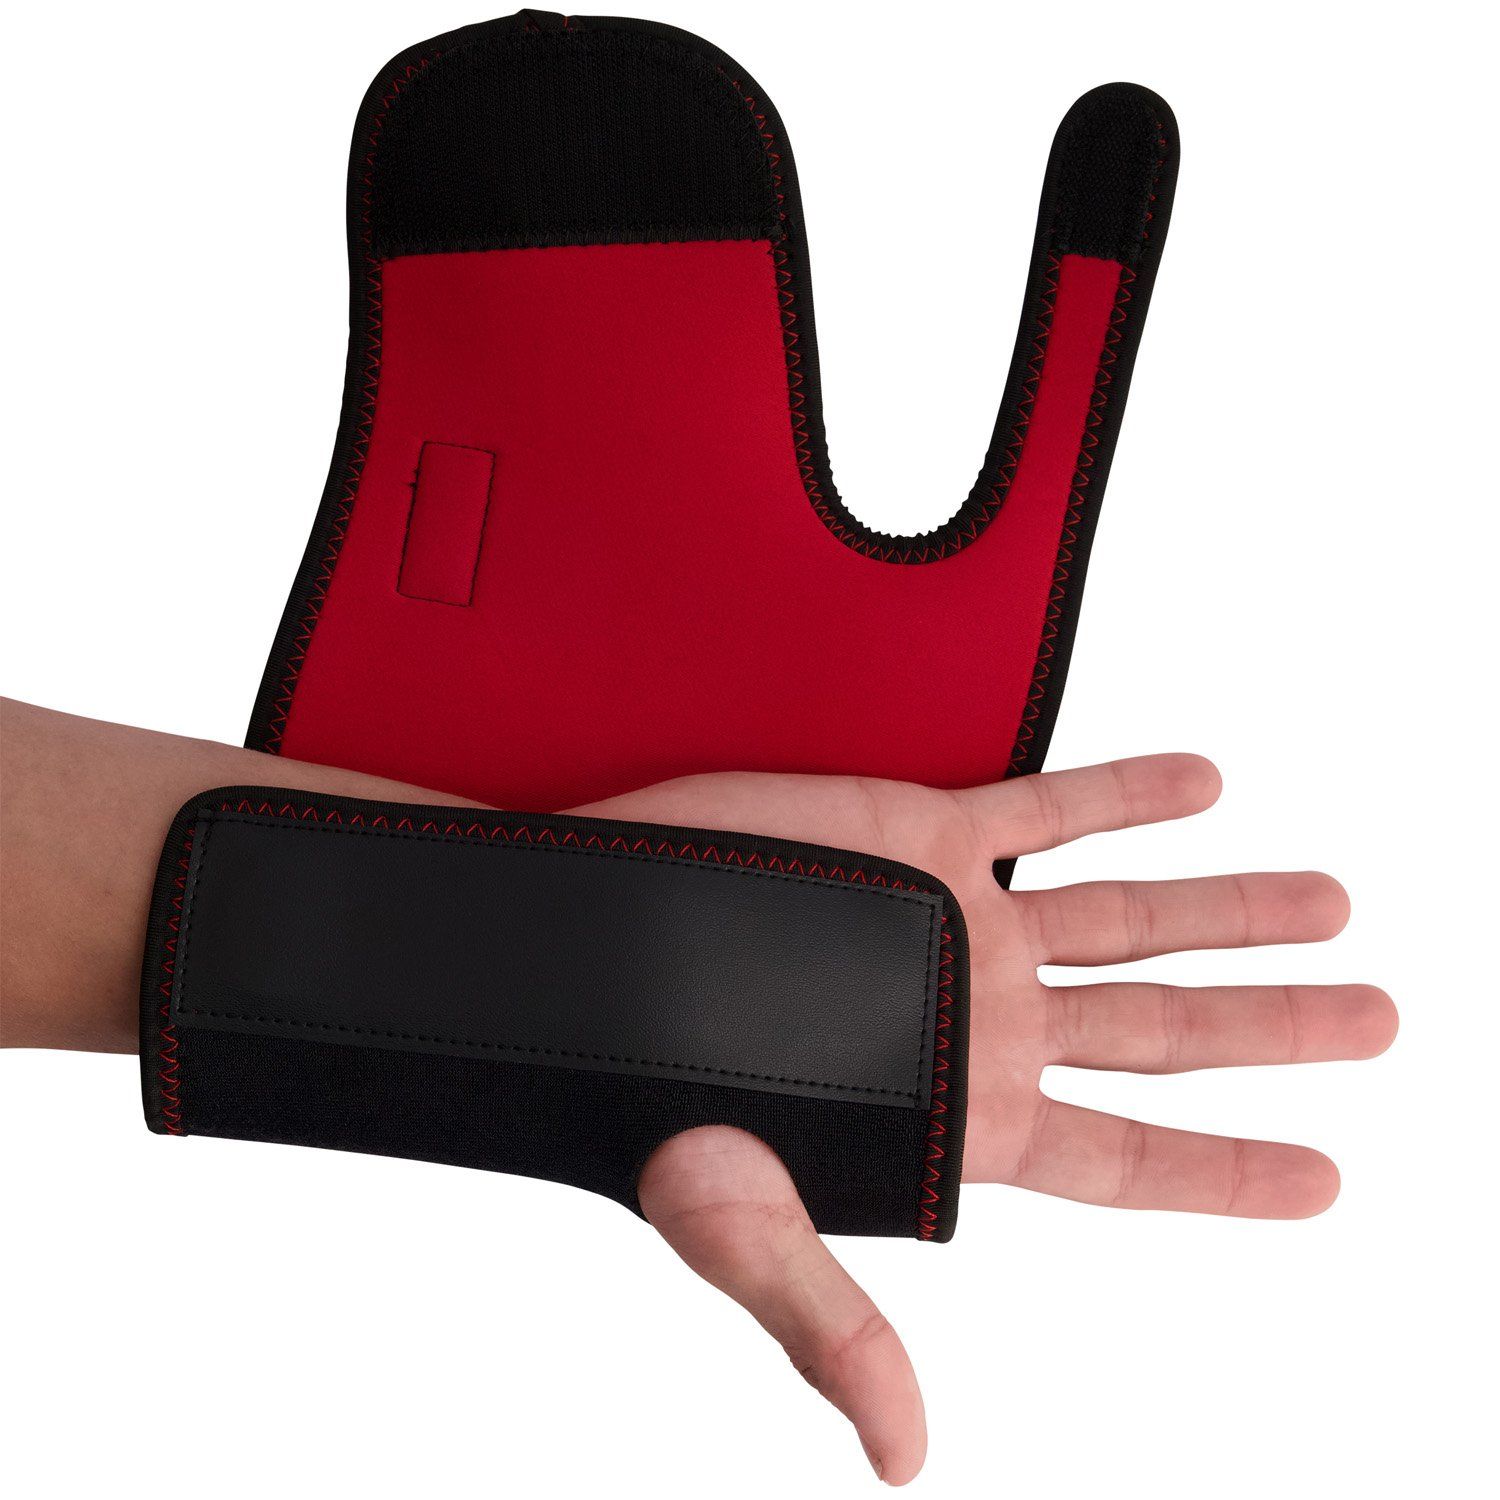 gladiator sports carpal tunnel syndrome wrist support unwrapped